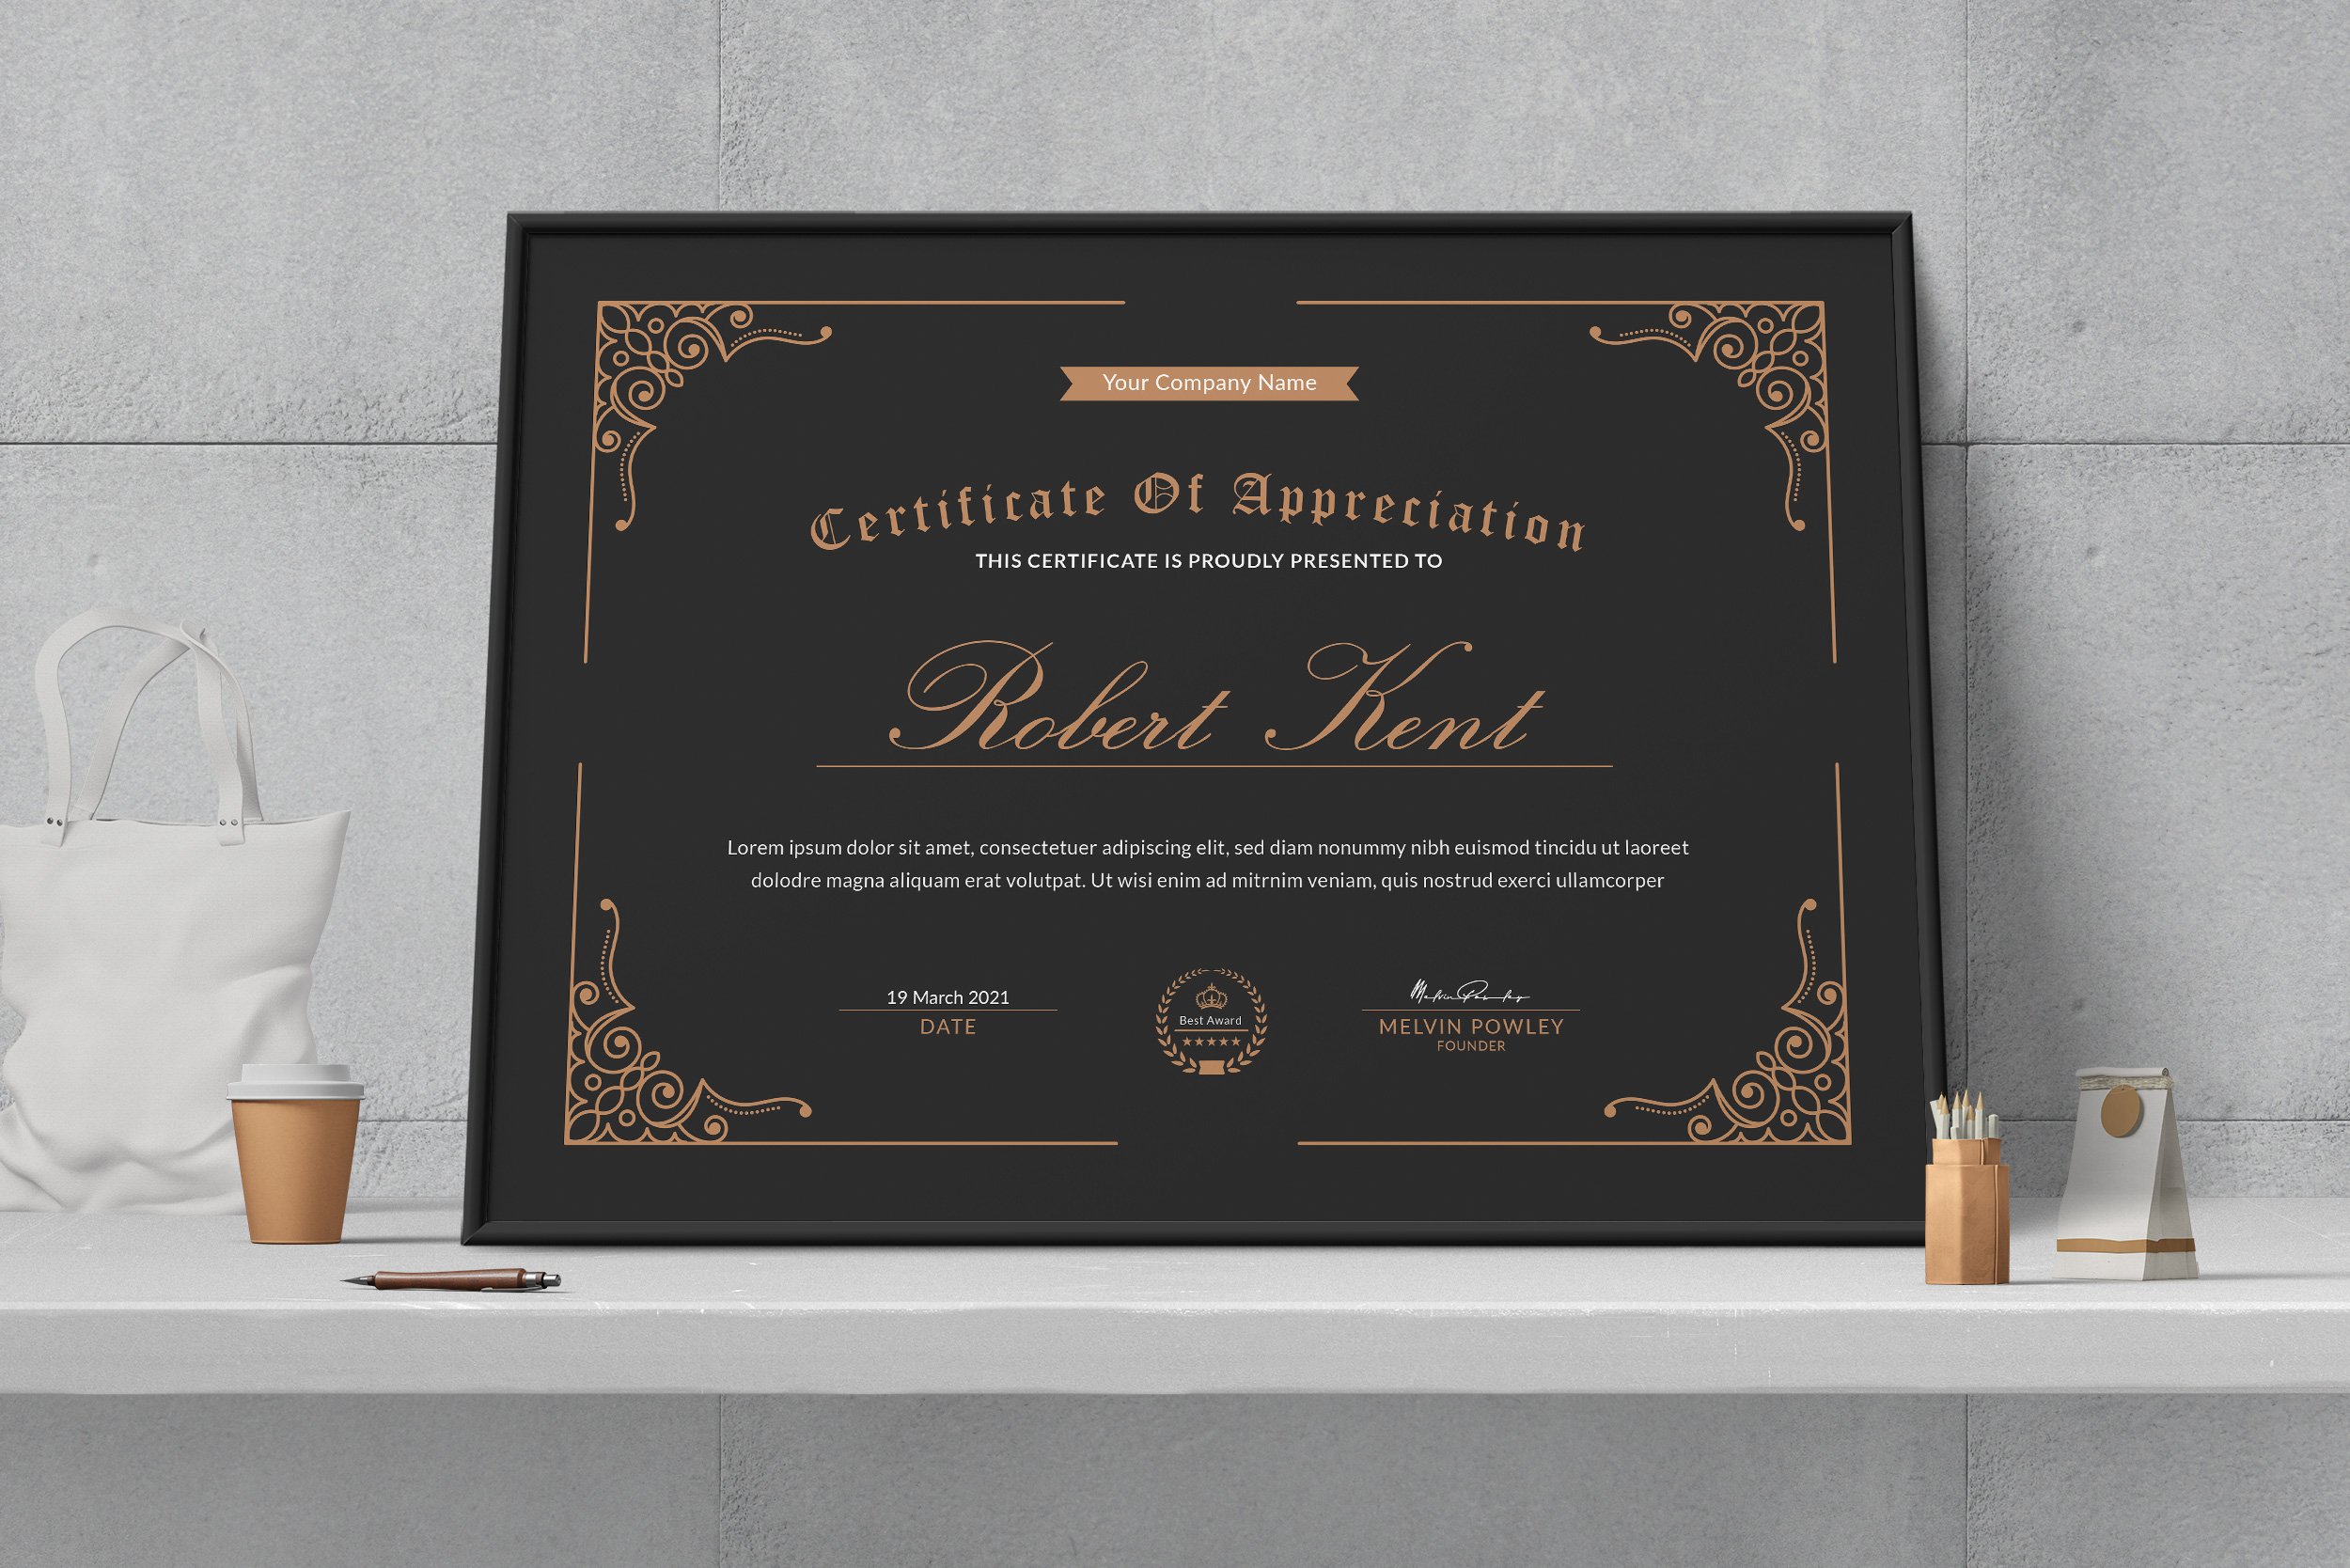 Certificate of Appreciation Template preview image.